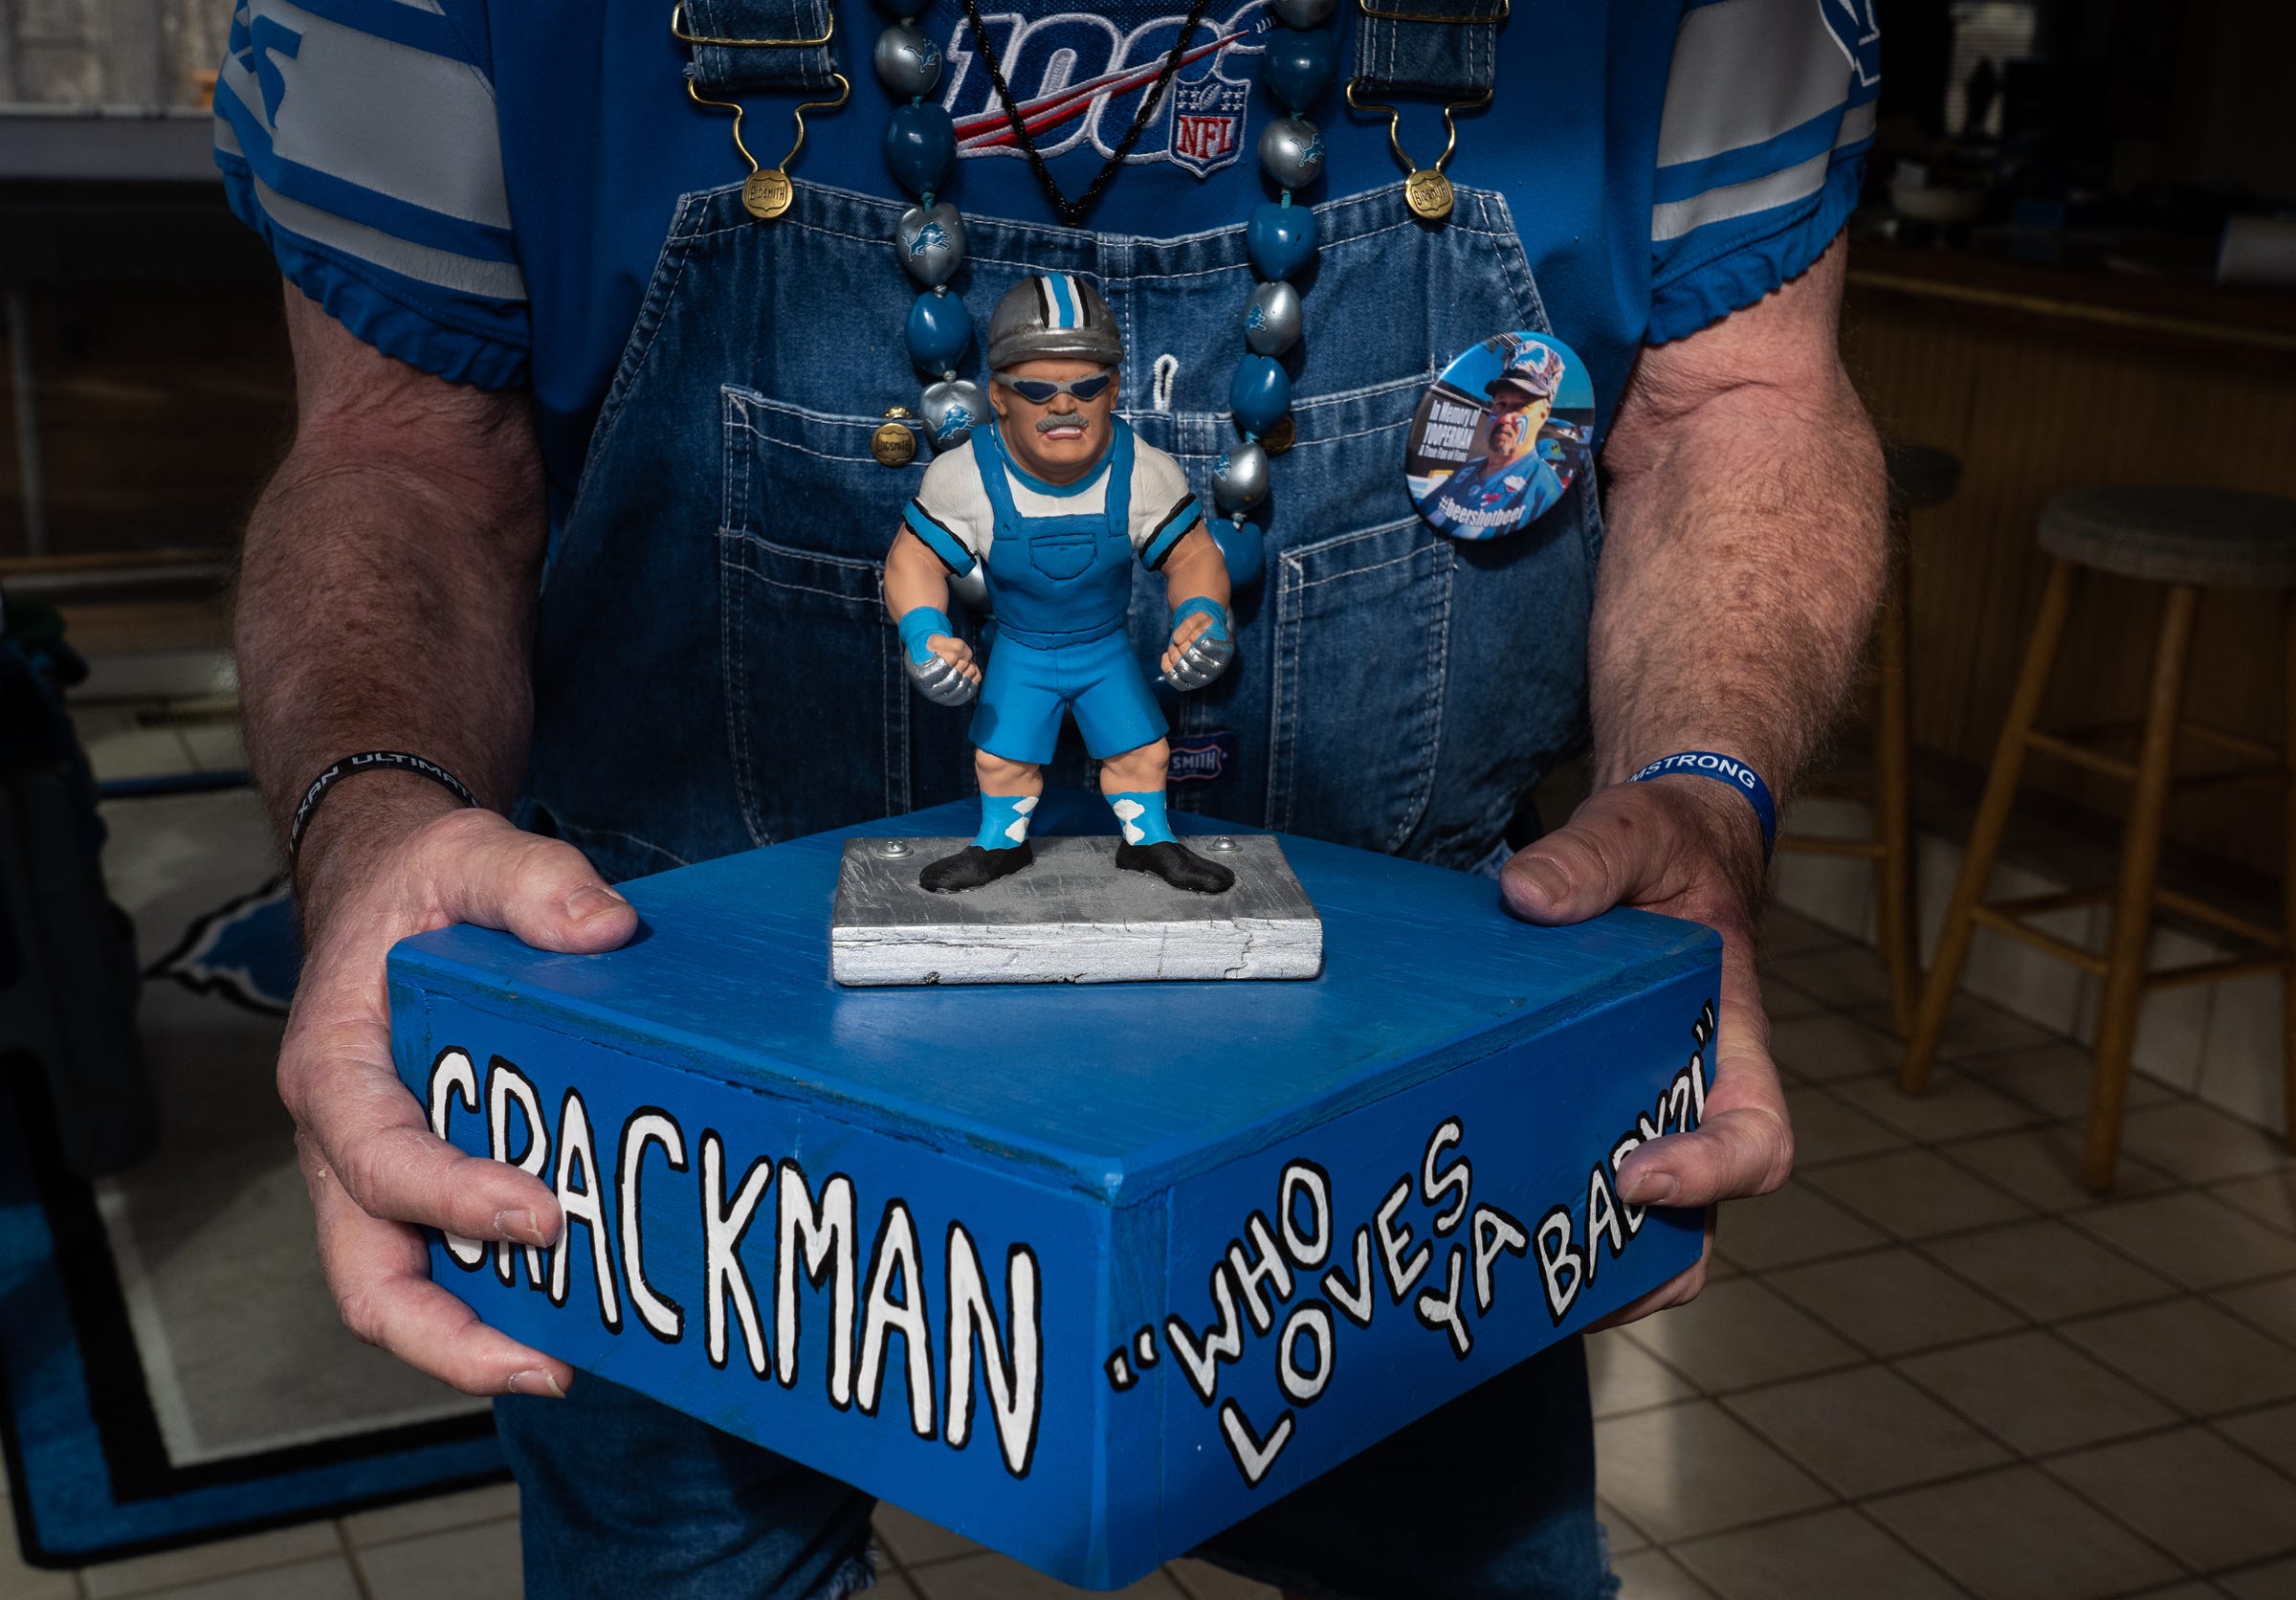 Diehard Detroit Lions Superfan Ron "Crackman" Crachiola, 69, of Macomb Township, holds a figurine a friend made for him with his slogan "Who loves ya, baby?" While wearing a button in memory of his friend and Detroit Lions fan the late Donnie "Yooperman" Stefanski at his home in Macomb Township on March 3, 2021.